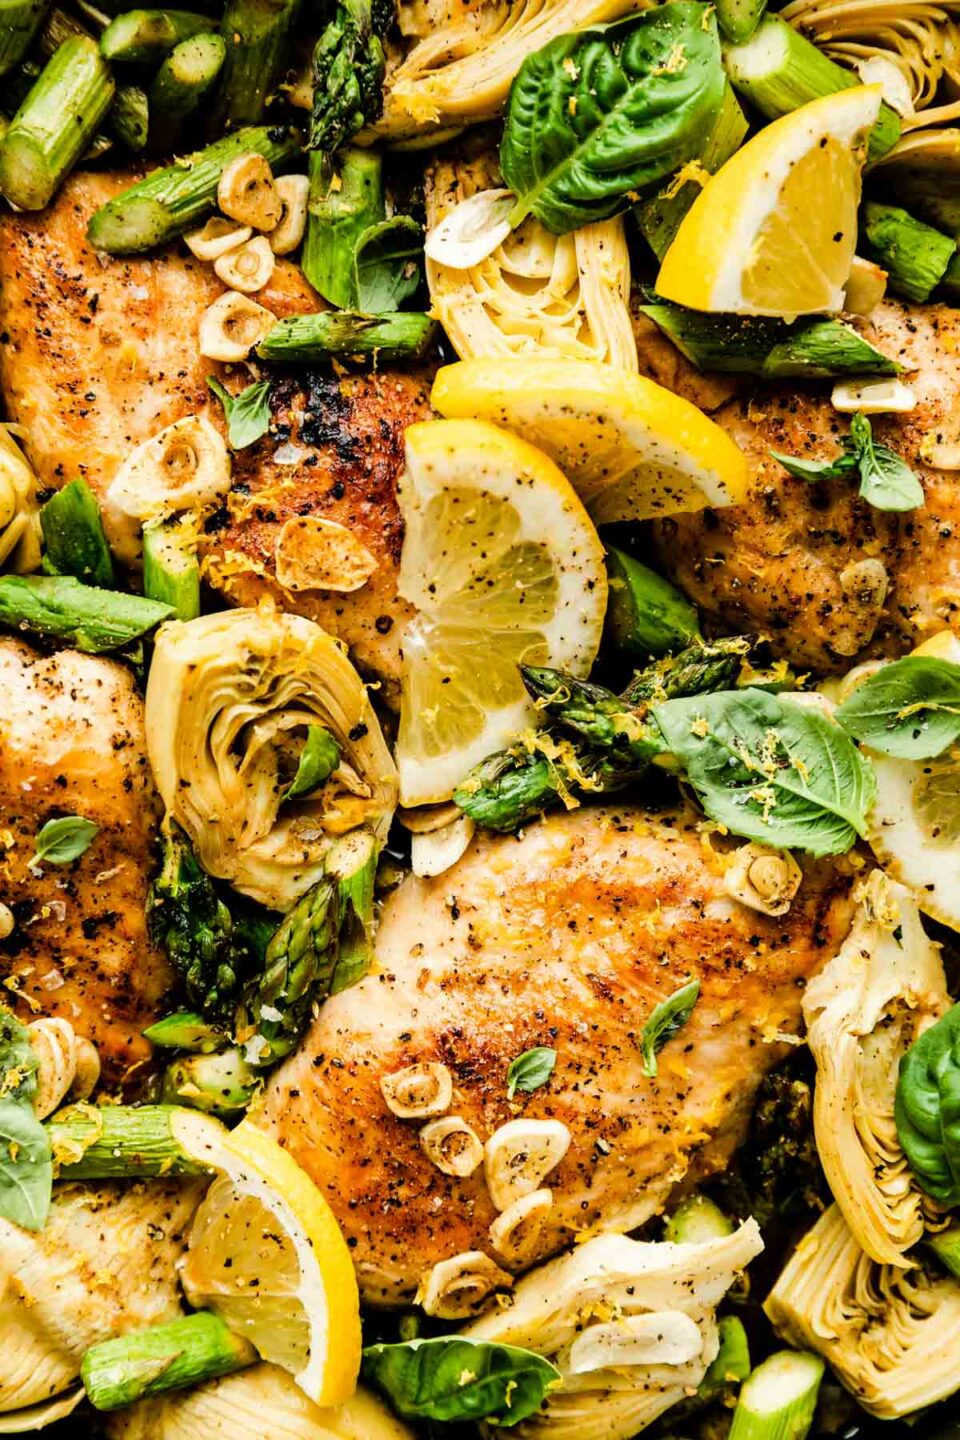 A close-up overhead shot of the baked lemon chicken skillet, with browned chicken breast, chopped asparagus, artichoke hearts and garlic. The skillet is topped with fresh basil leaves and lemon wedges.